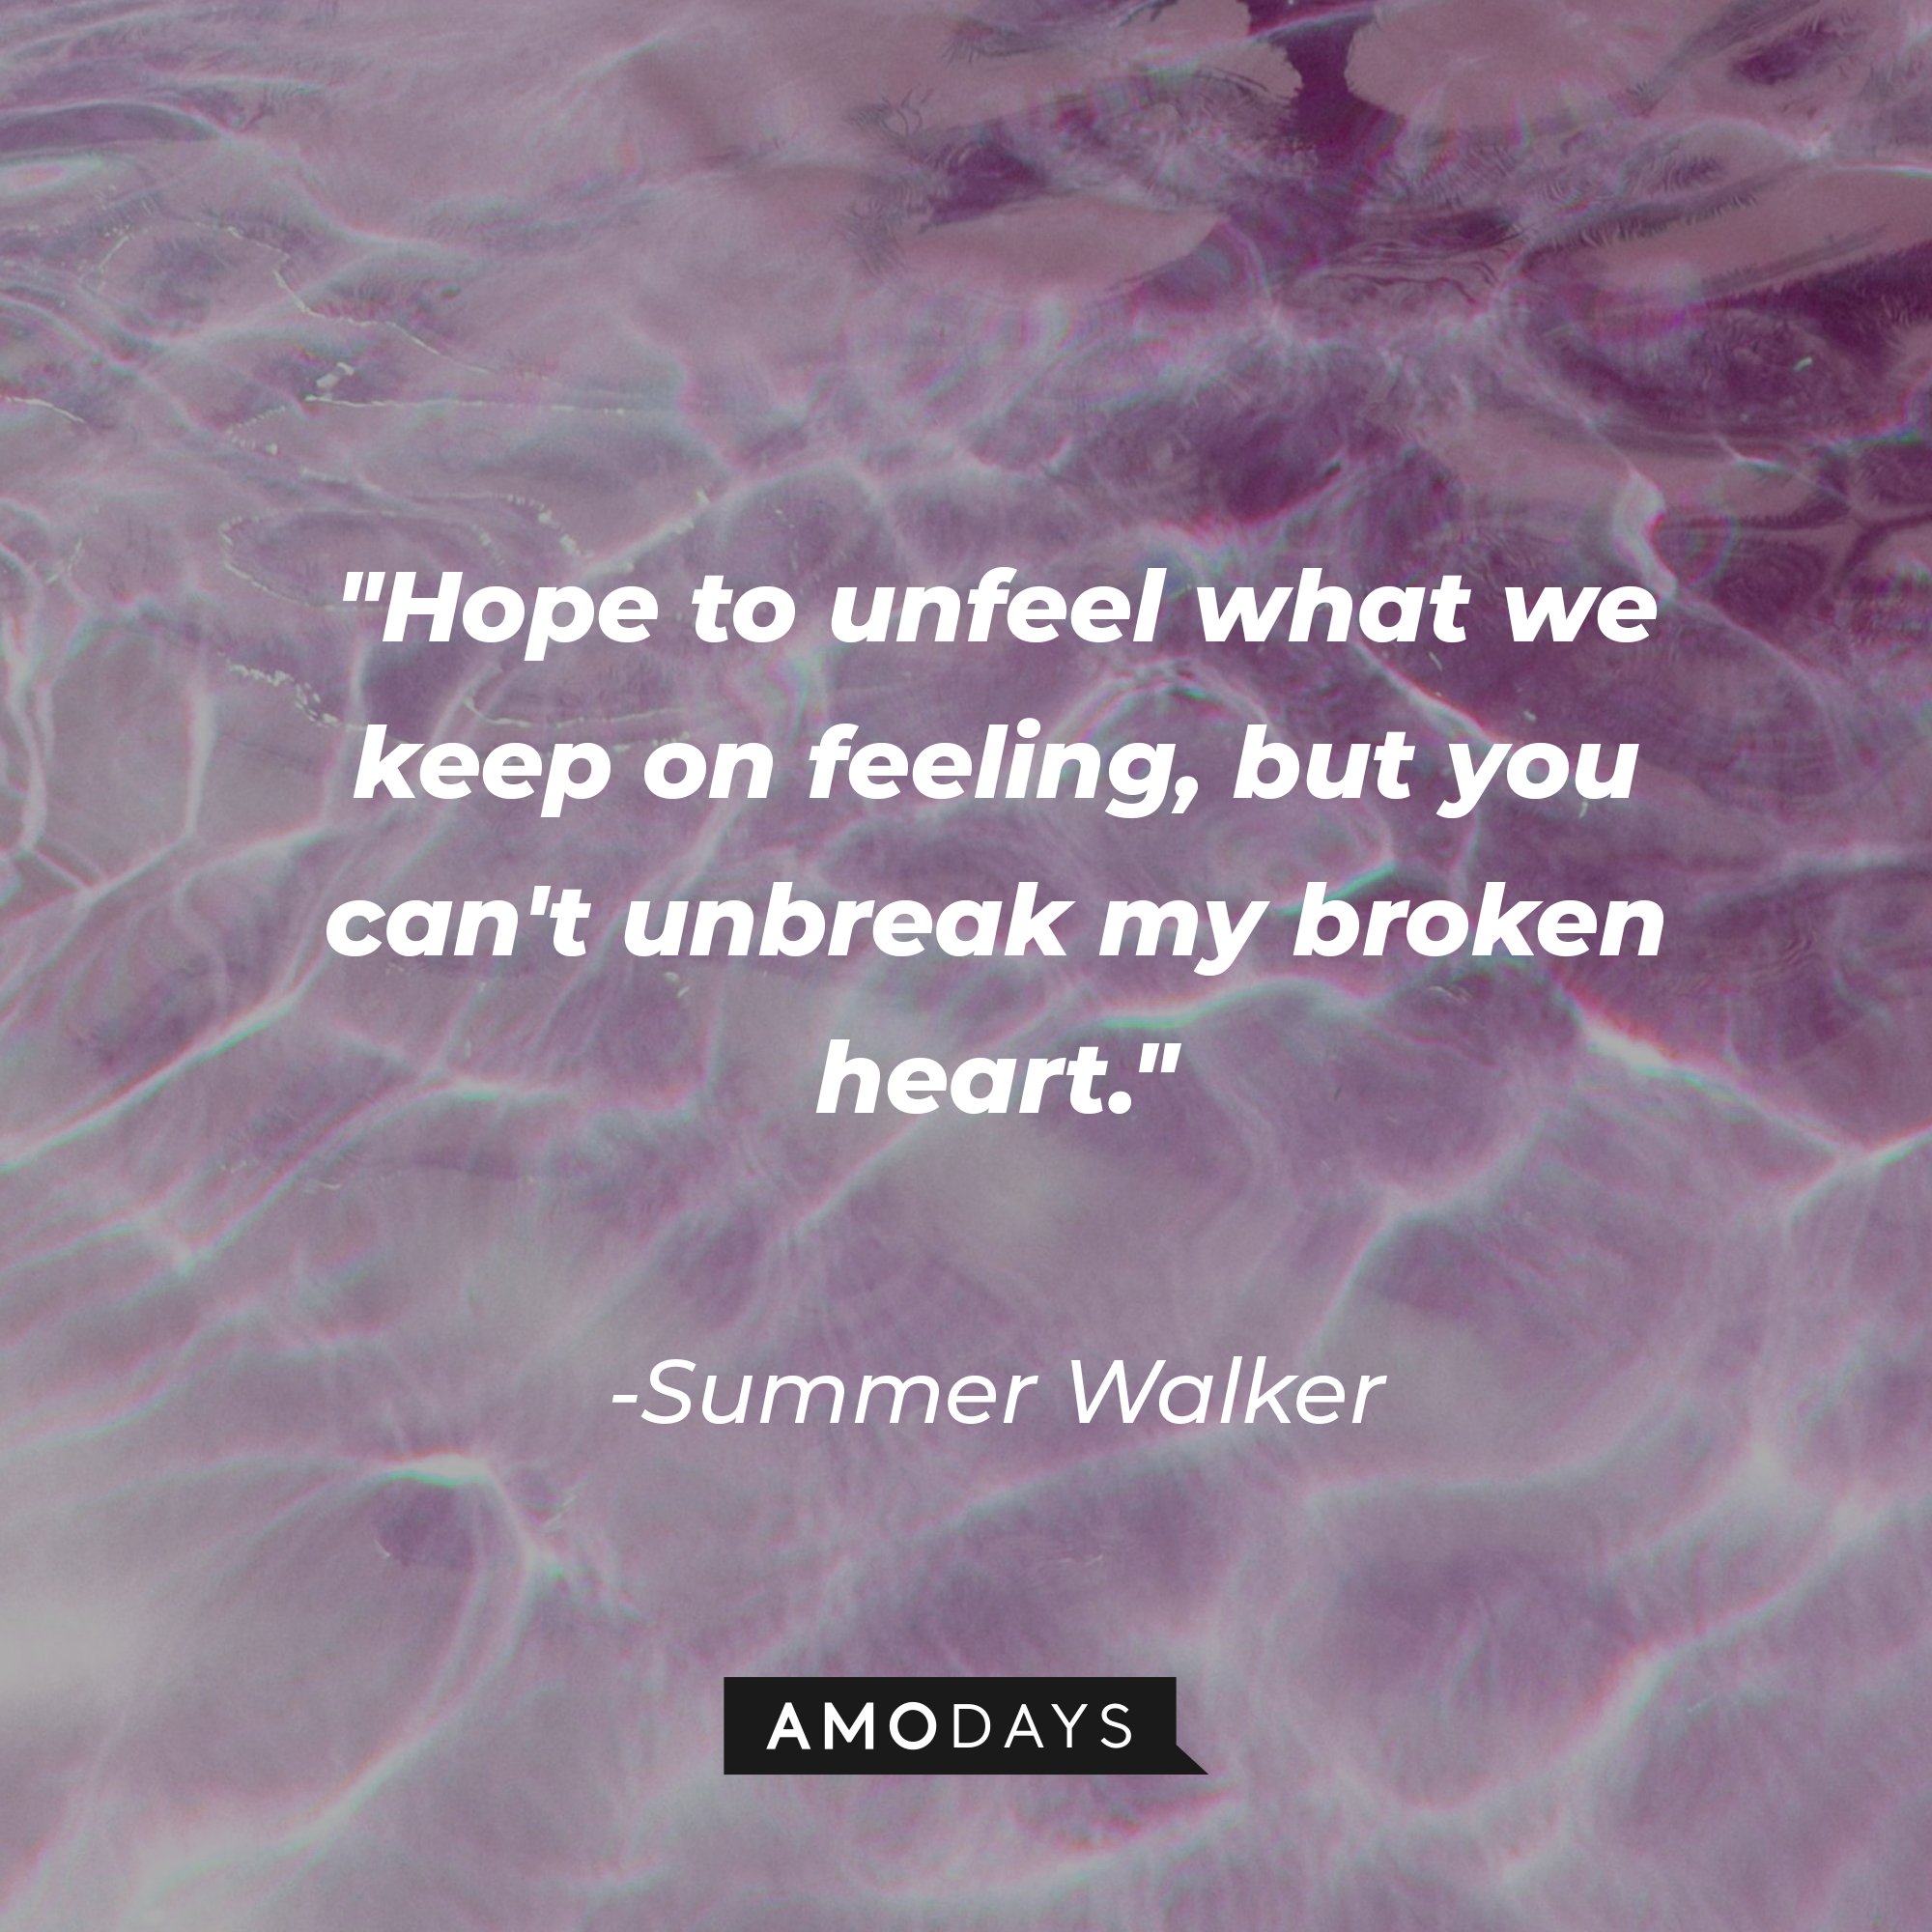 Summer Walker's quote: "Hope to unfeel what we keep on feeling, but you can't unbreak my broken heart." | Image: AmoDays